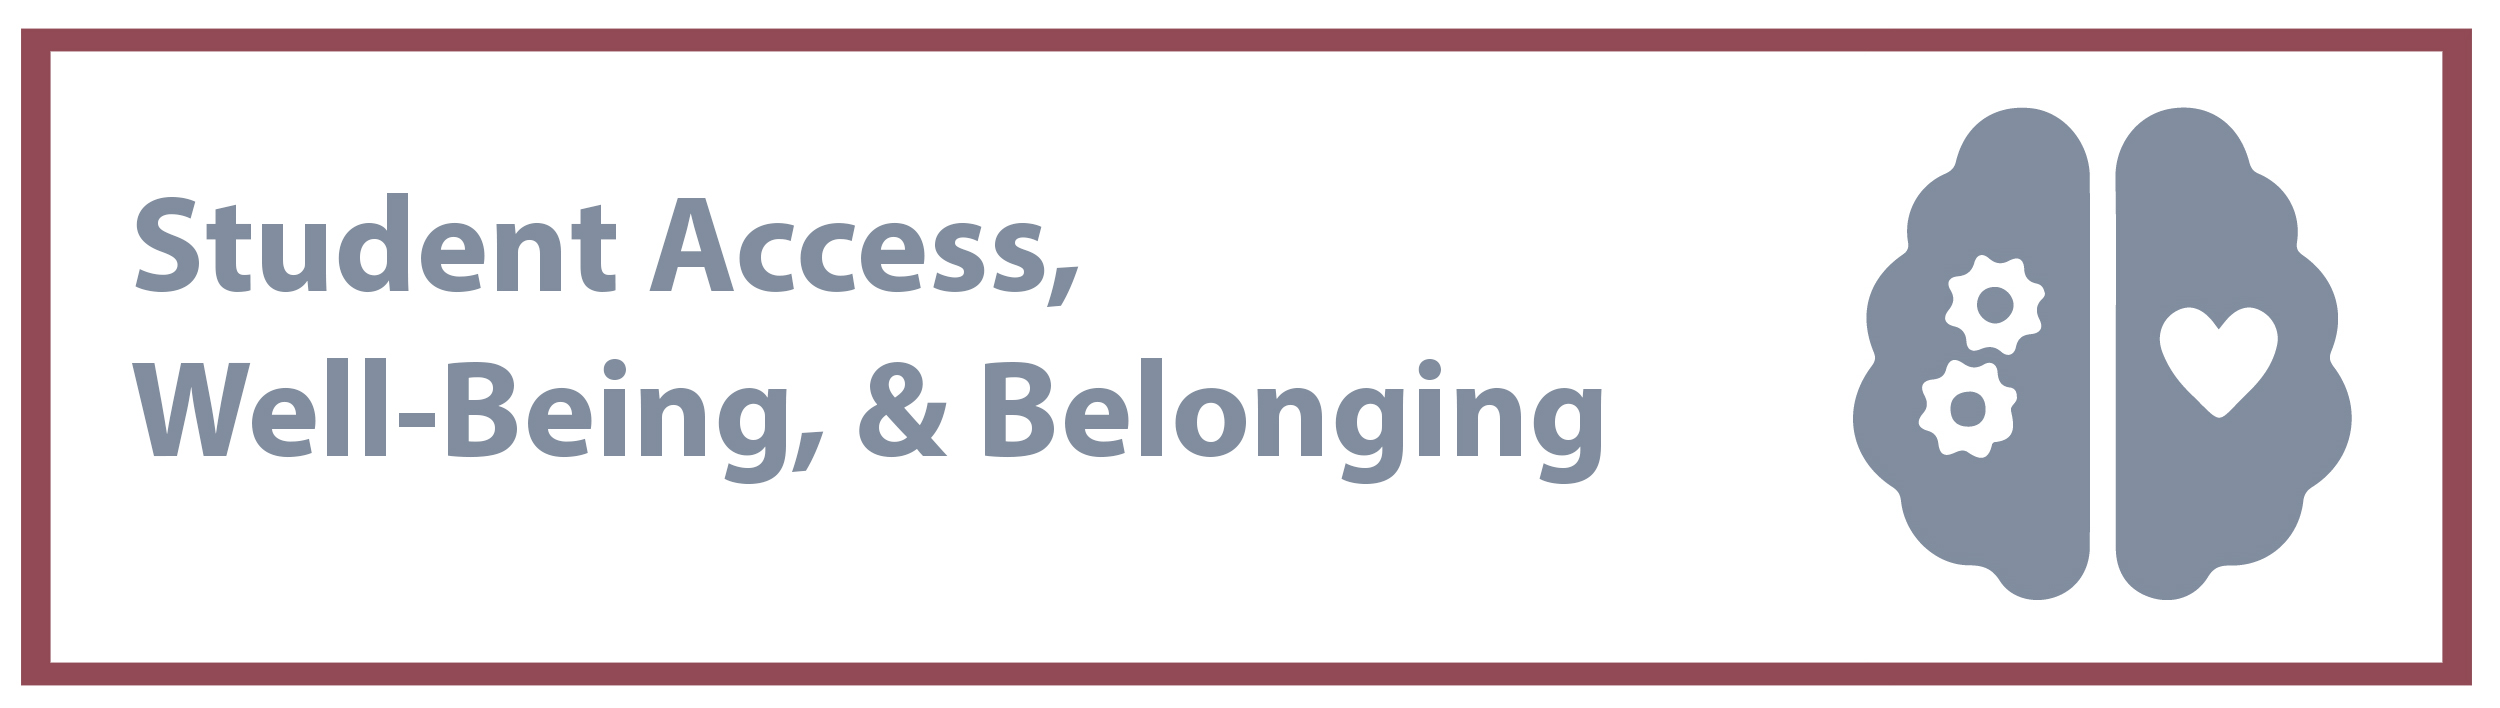 Student Access, Well-Being, & Belonging